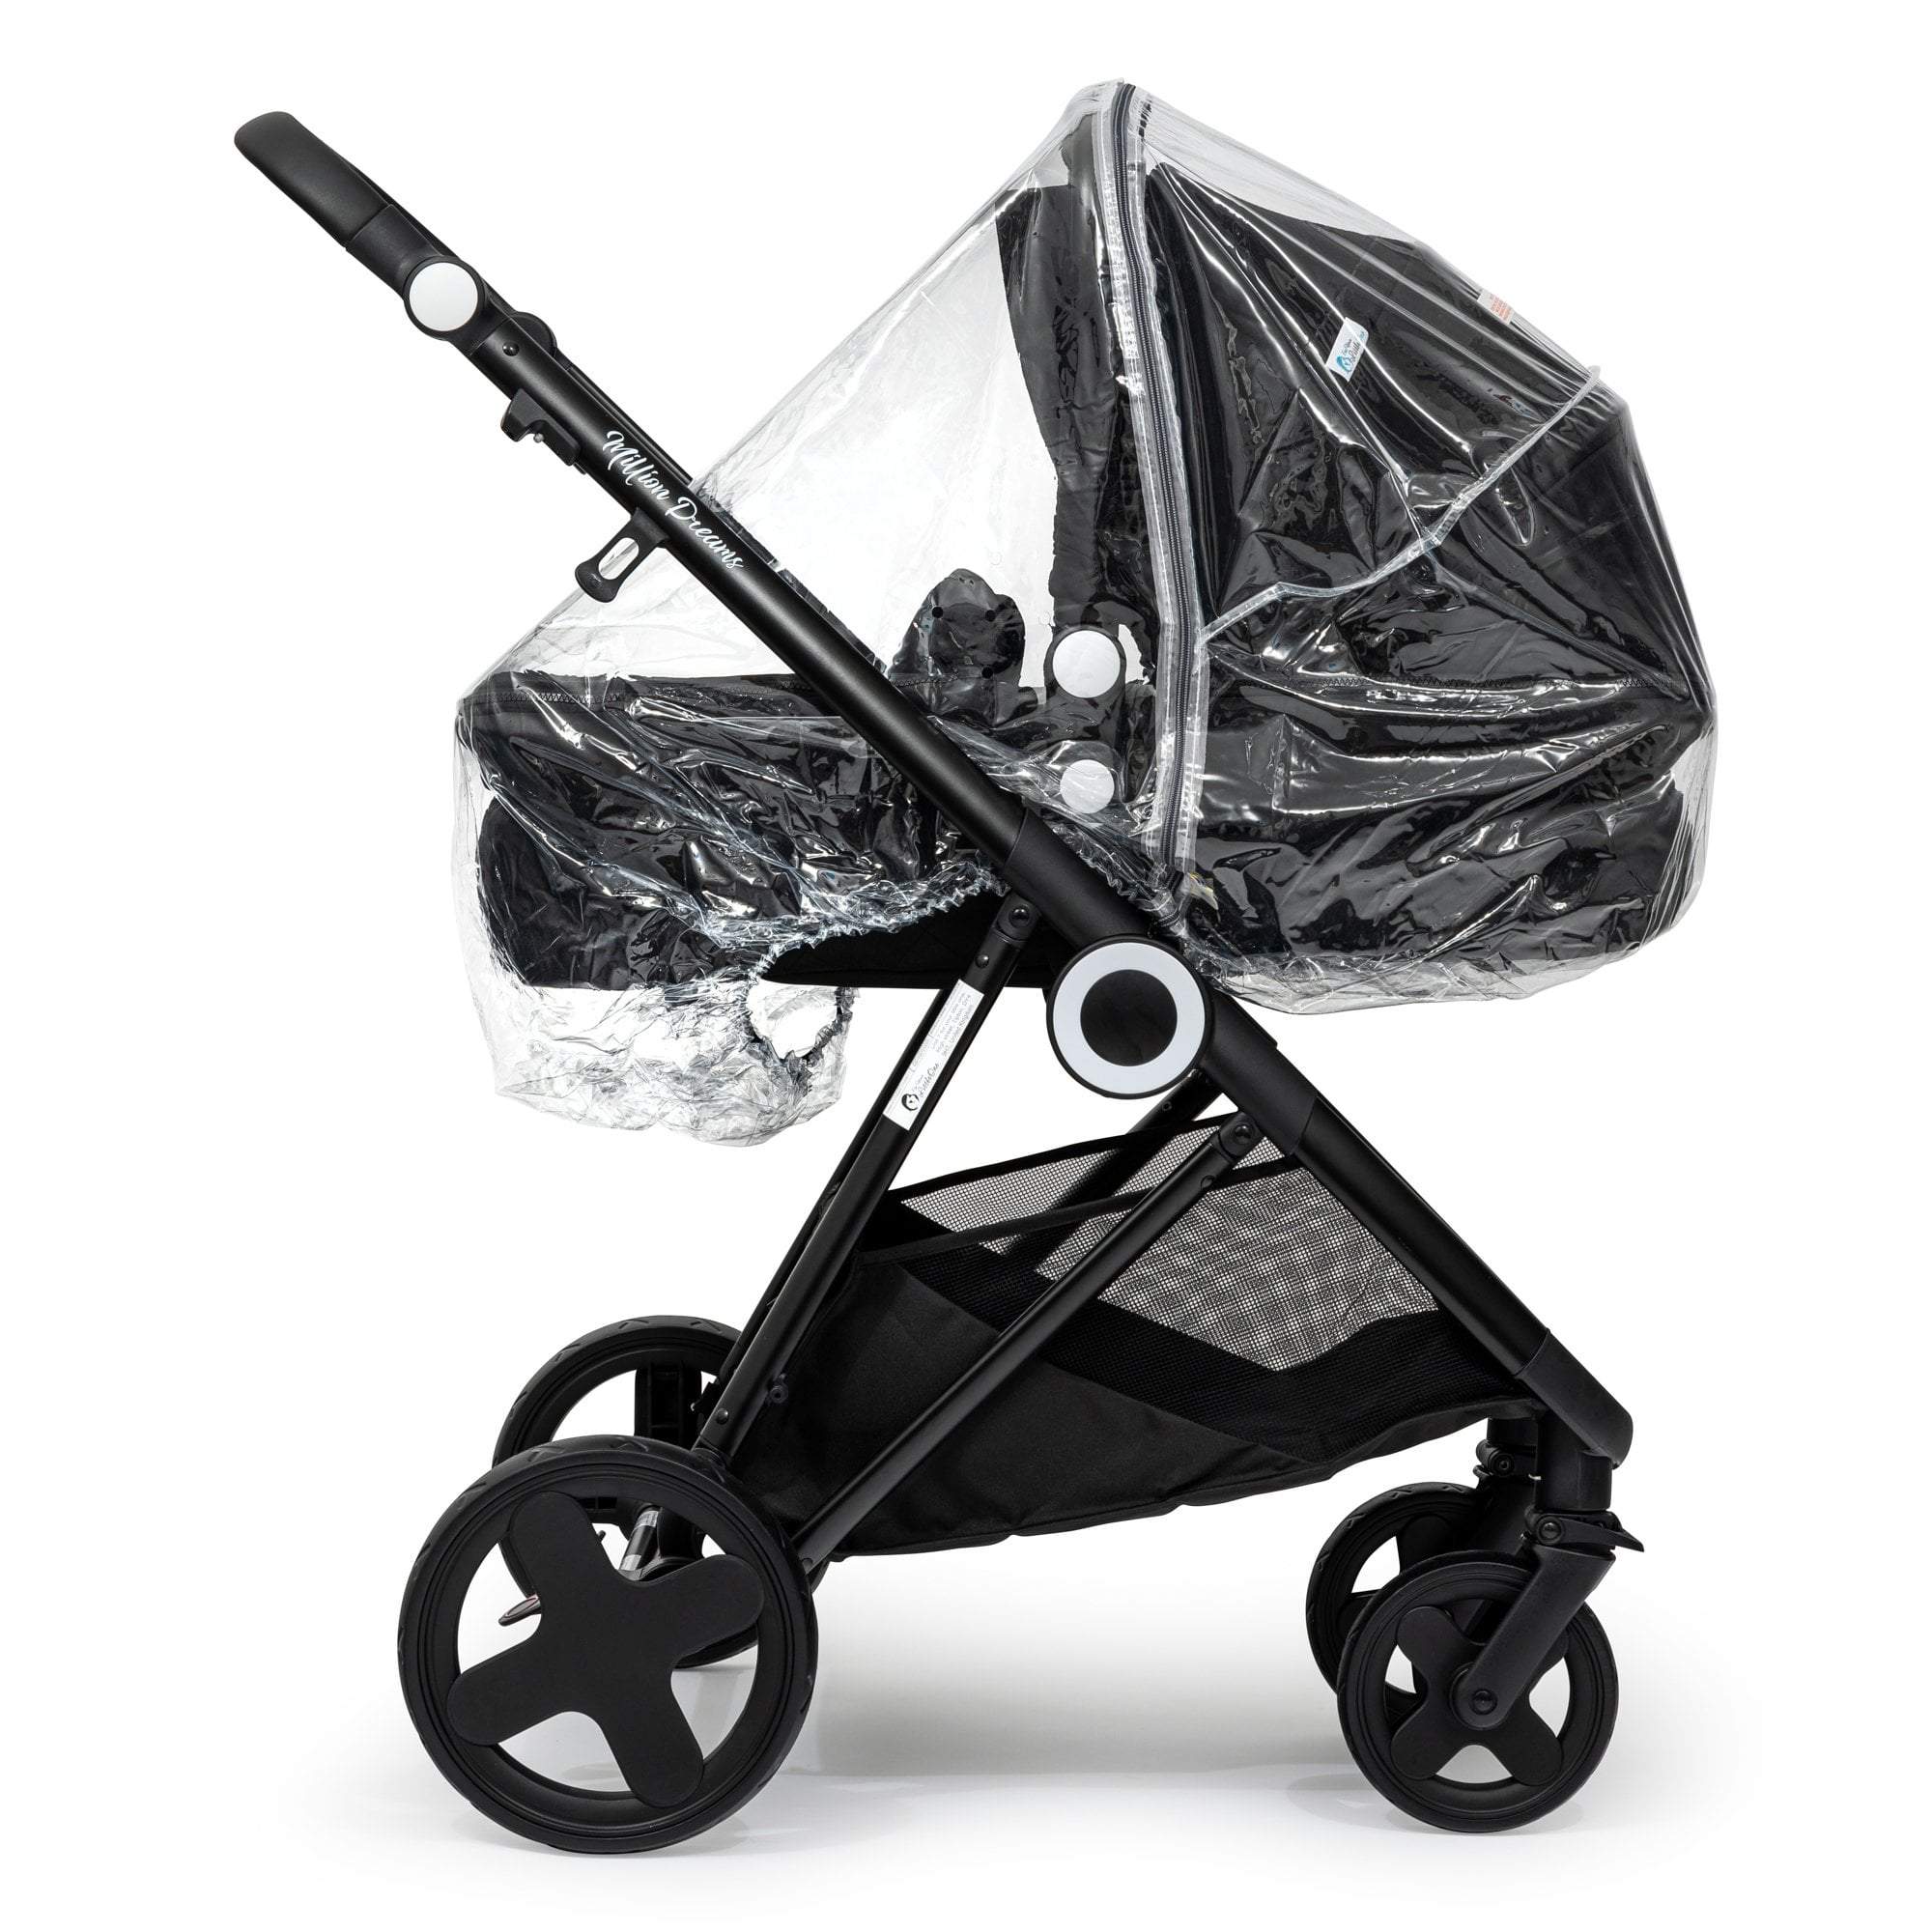 Carrycot Raincover Compatible With Firstwheels - Fits All Models - For Your Little One